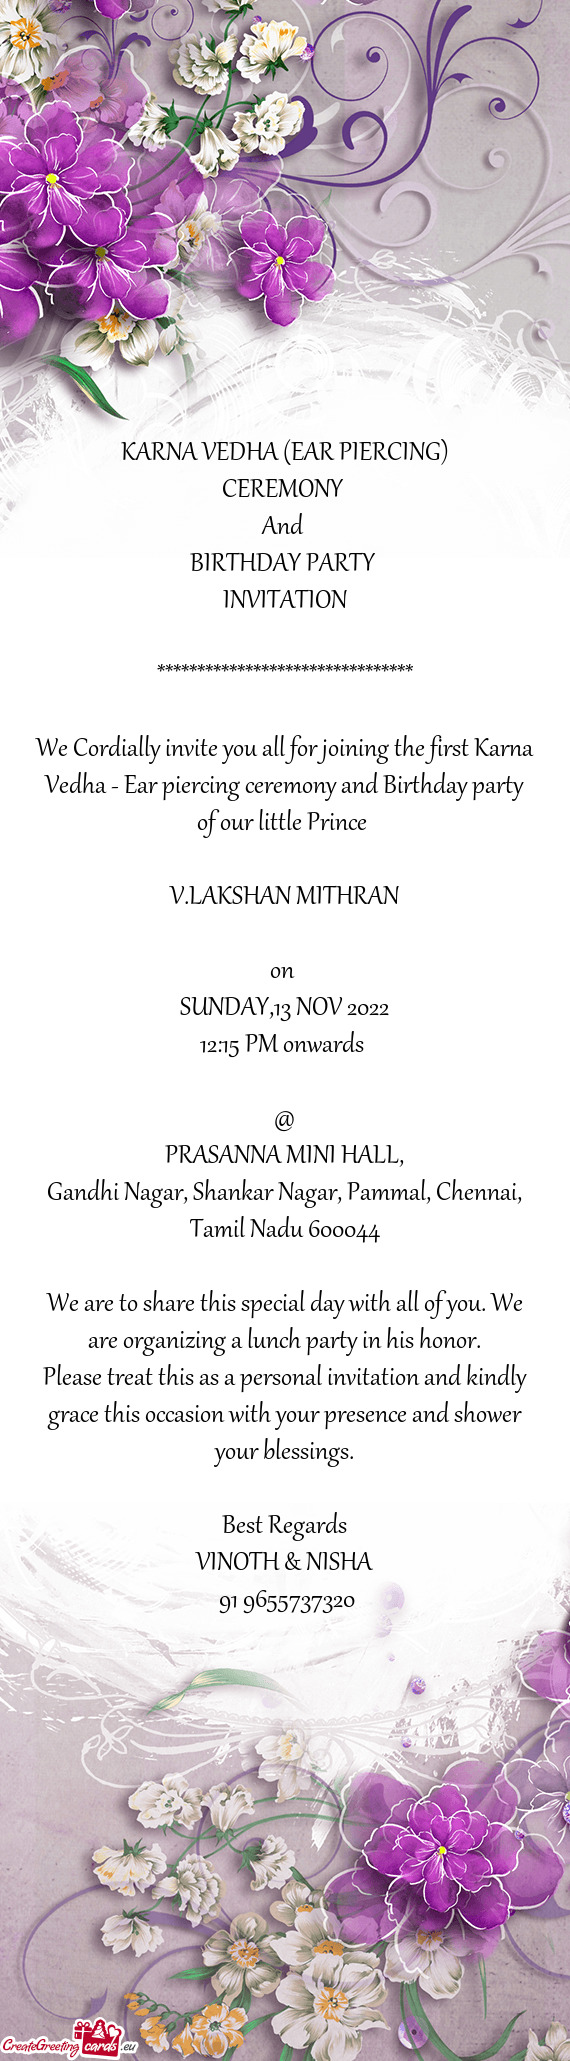 We Cordially invite you all for joining the first Karna Vedha - Ear piercing ceremony and Birthday p